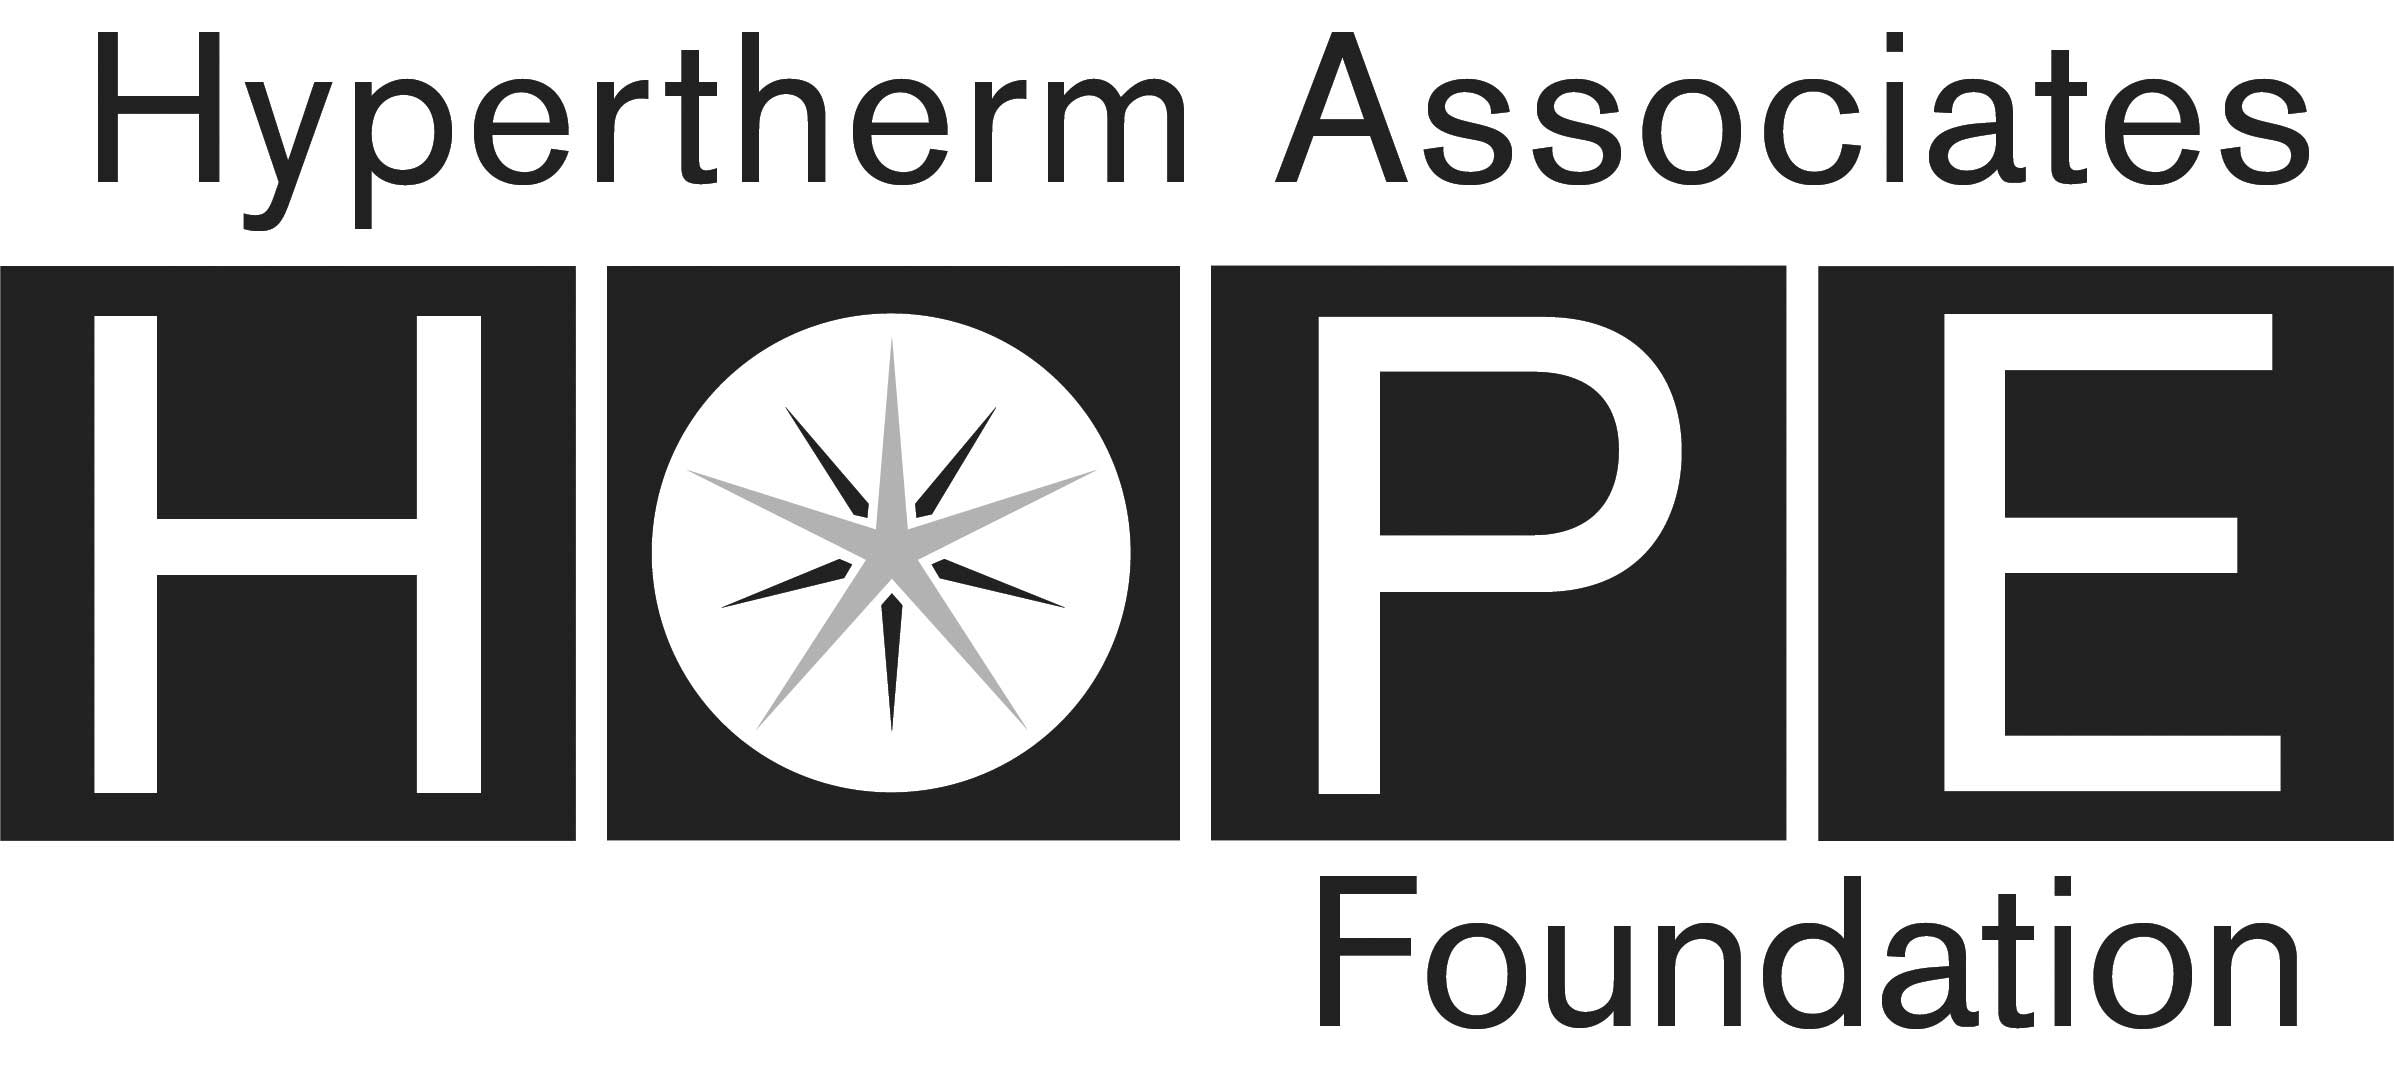 HOPE Foundation logo in black and white